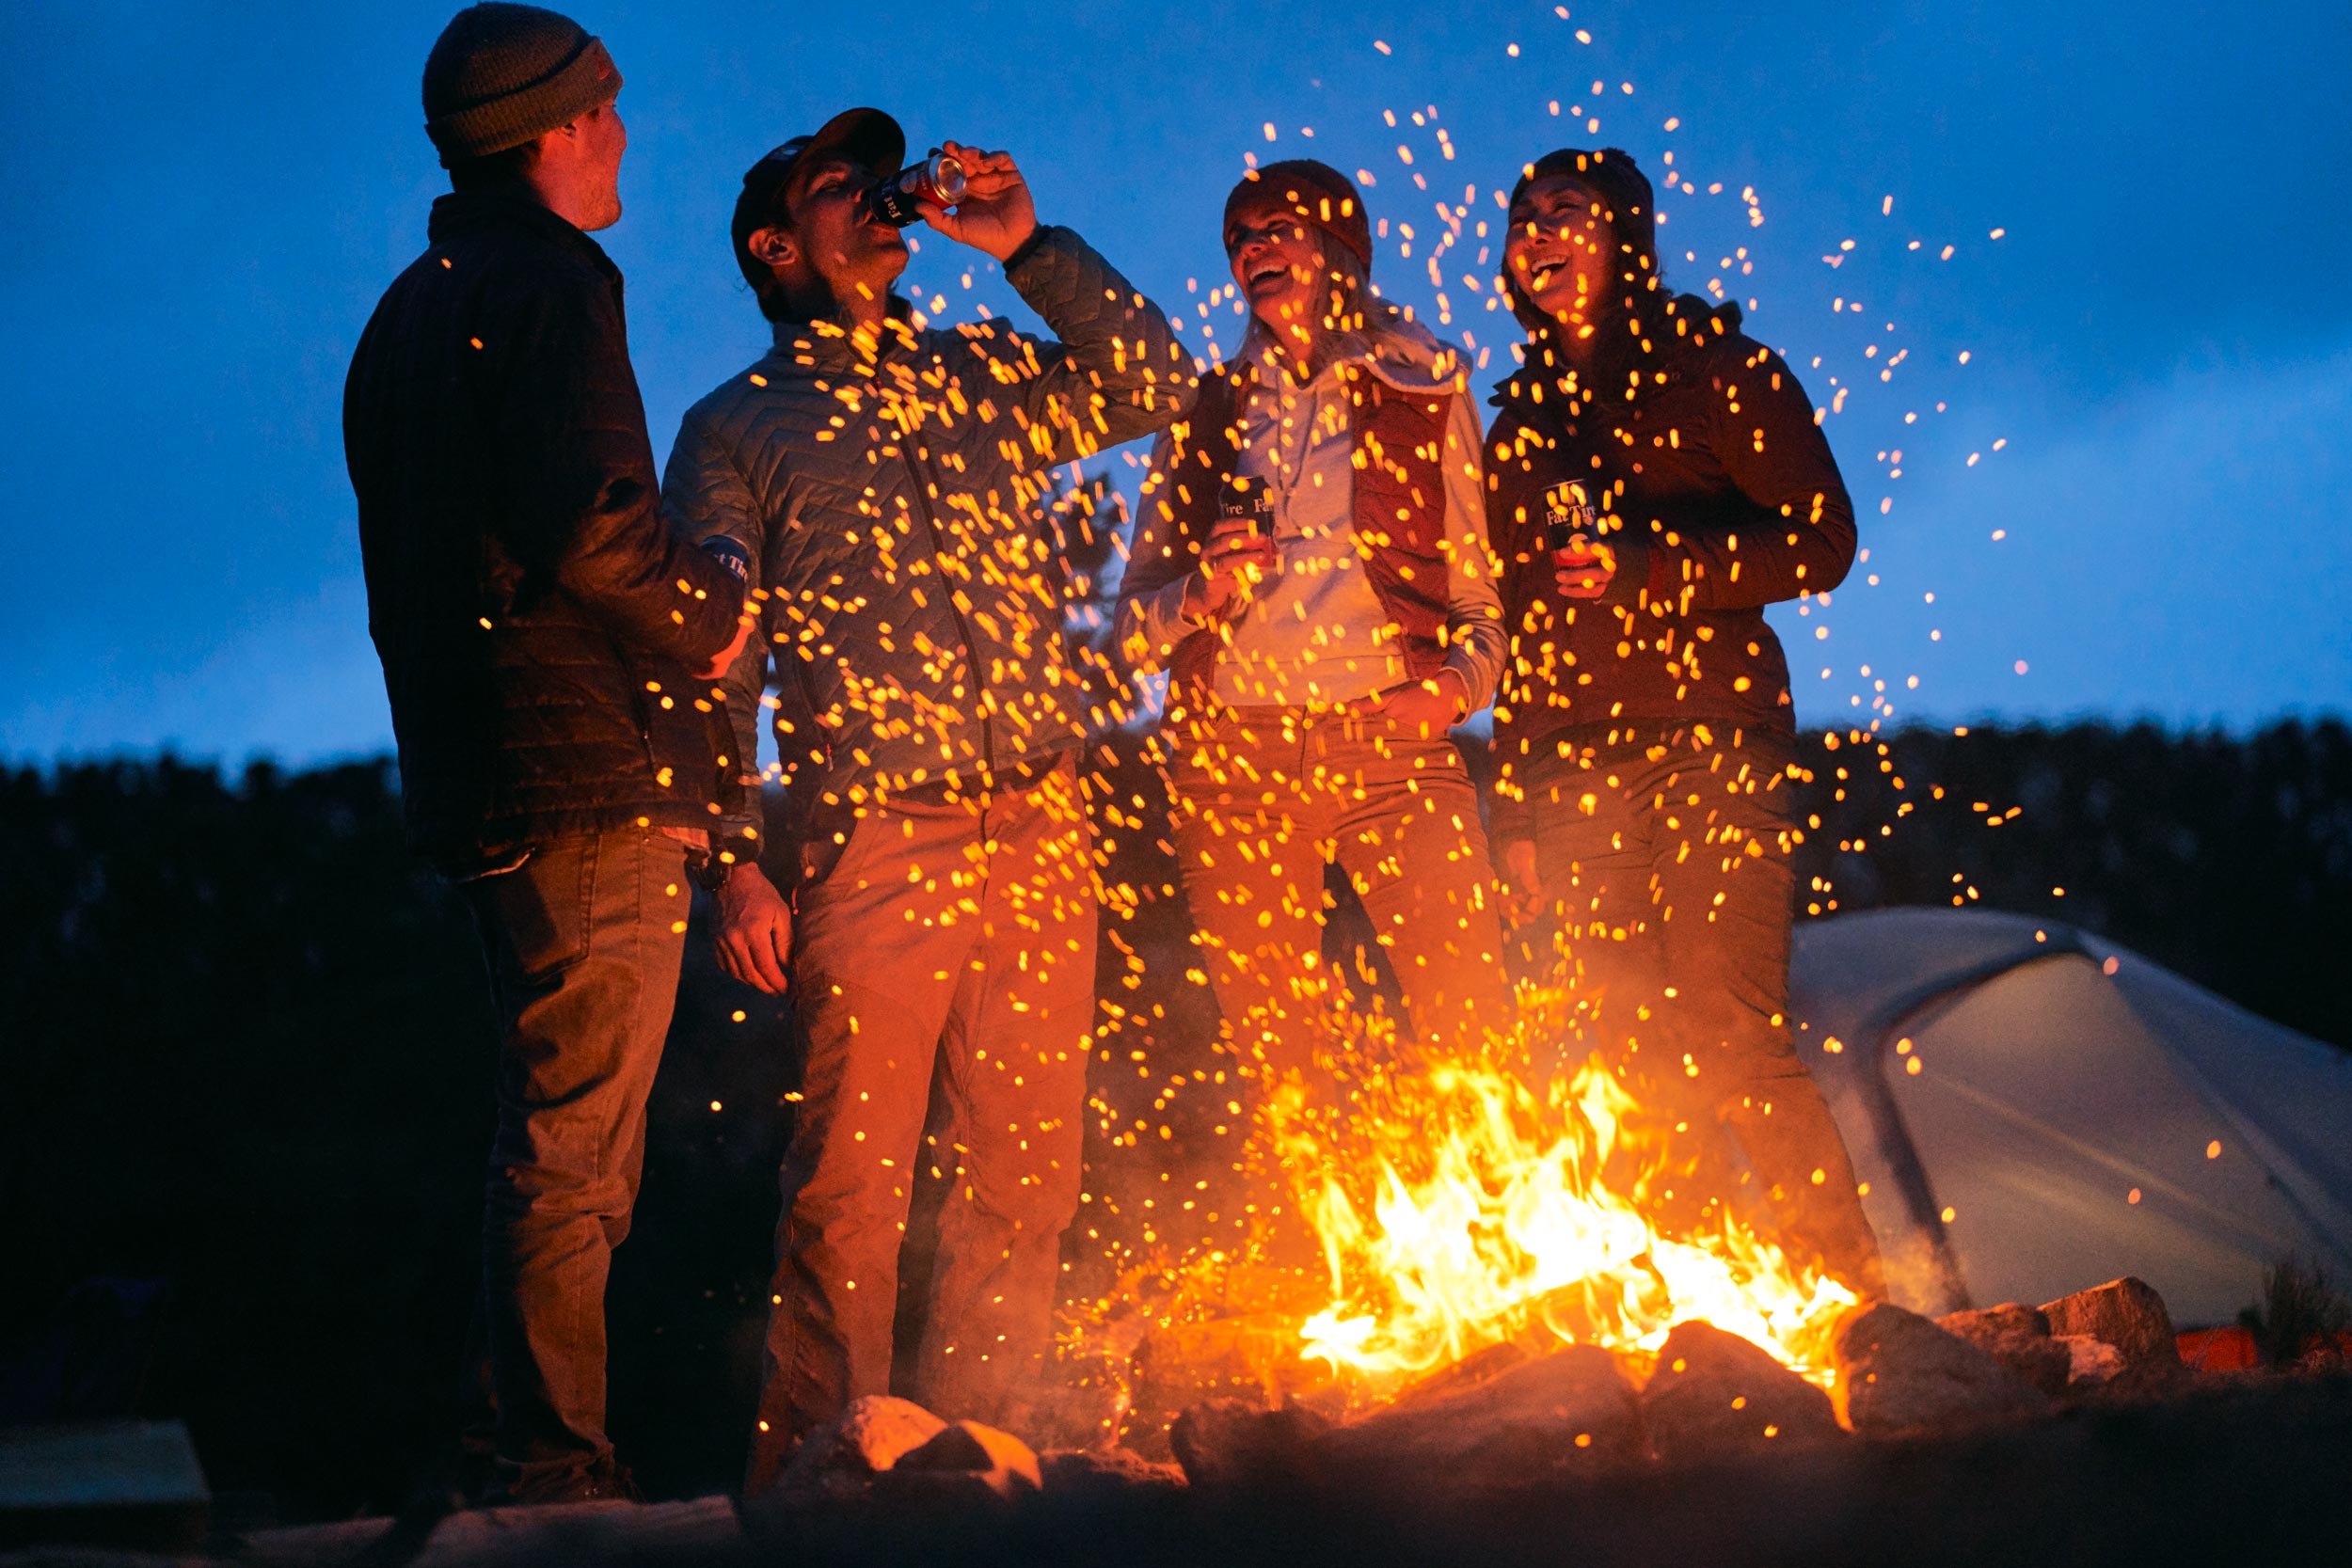 Andrew Maguire photographs friends around a campfire for a Fat Tire campaign in Colorado for New Belgium Brewing.